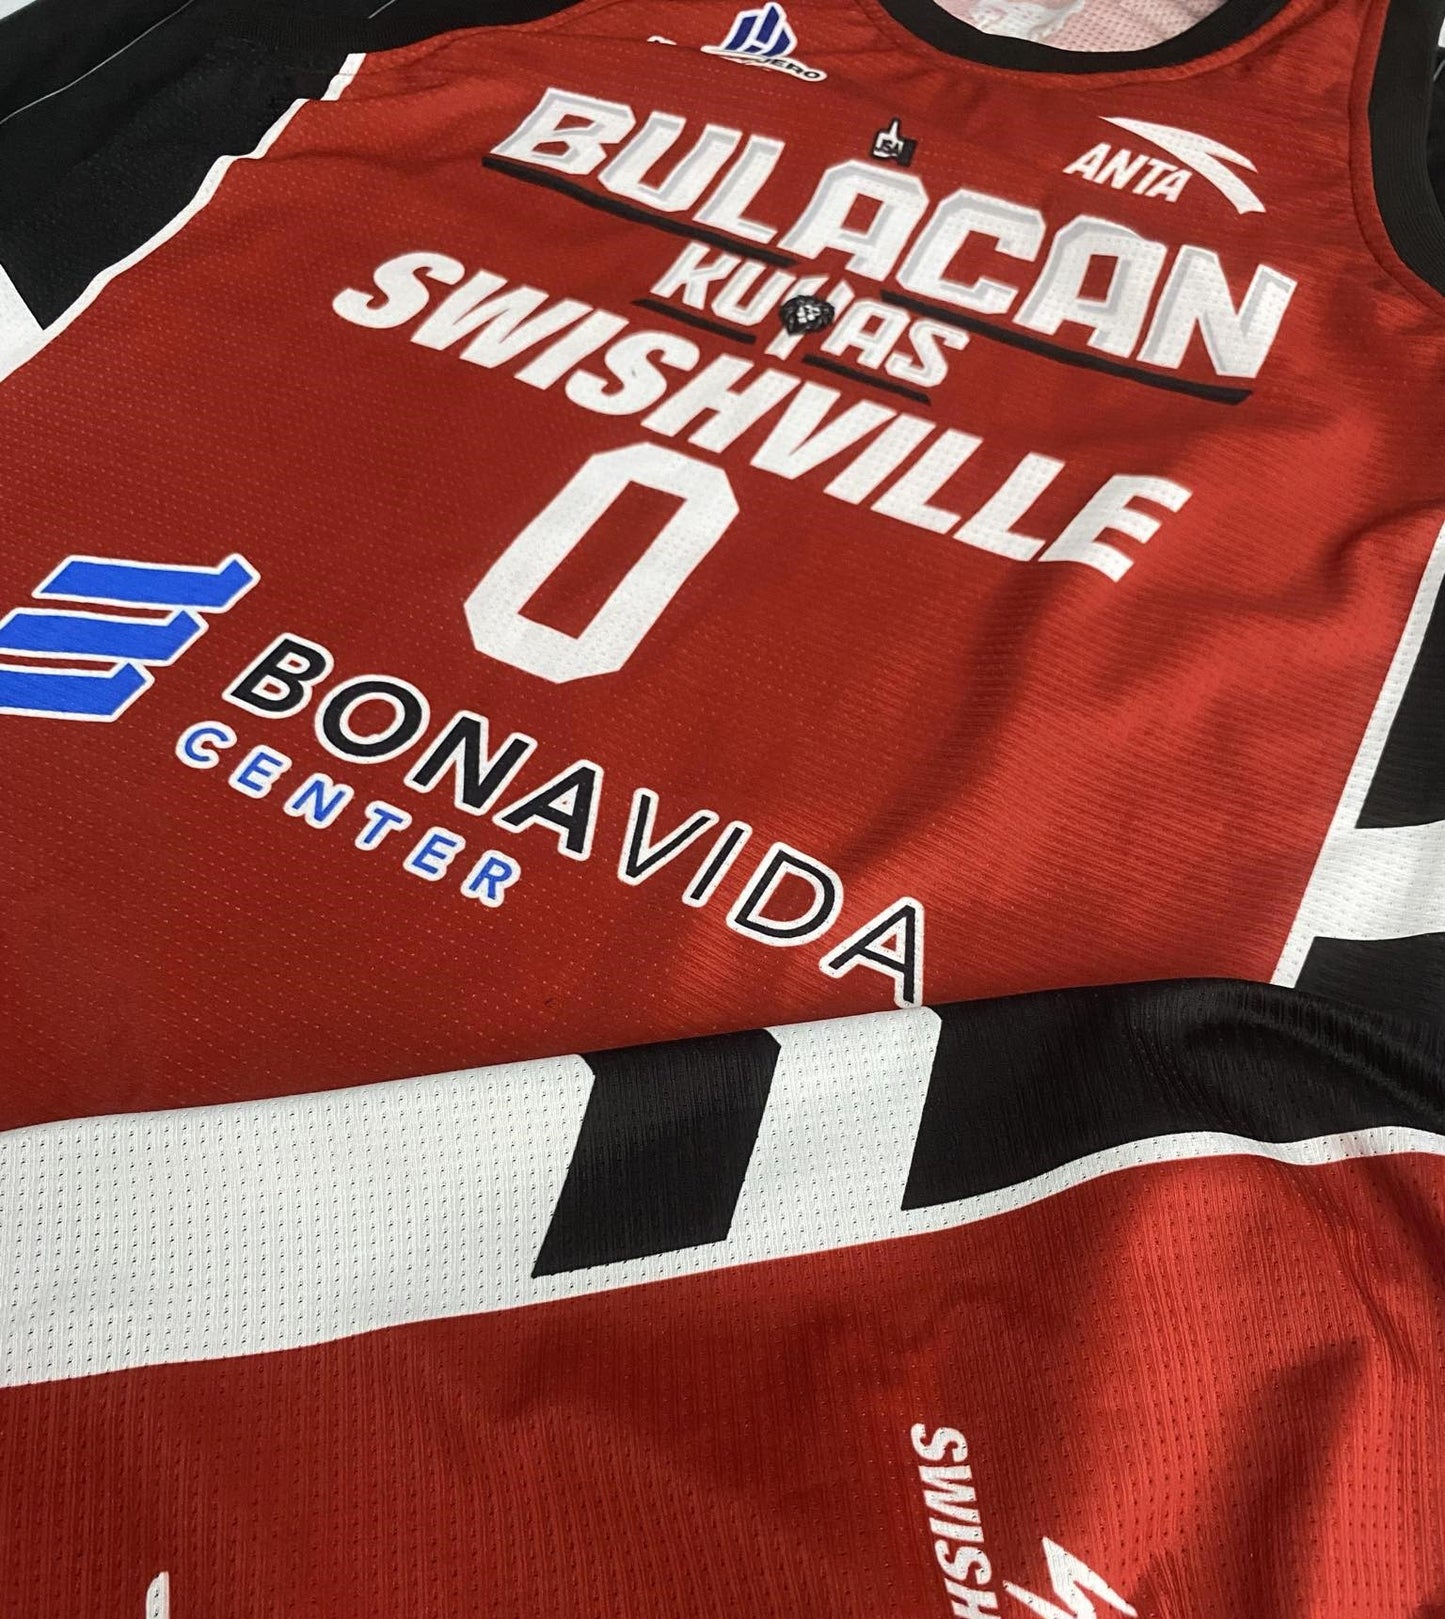 Bulacan Kuya's - MPBL Official Upper Jersey